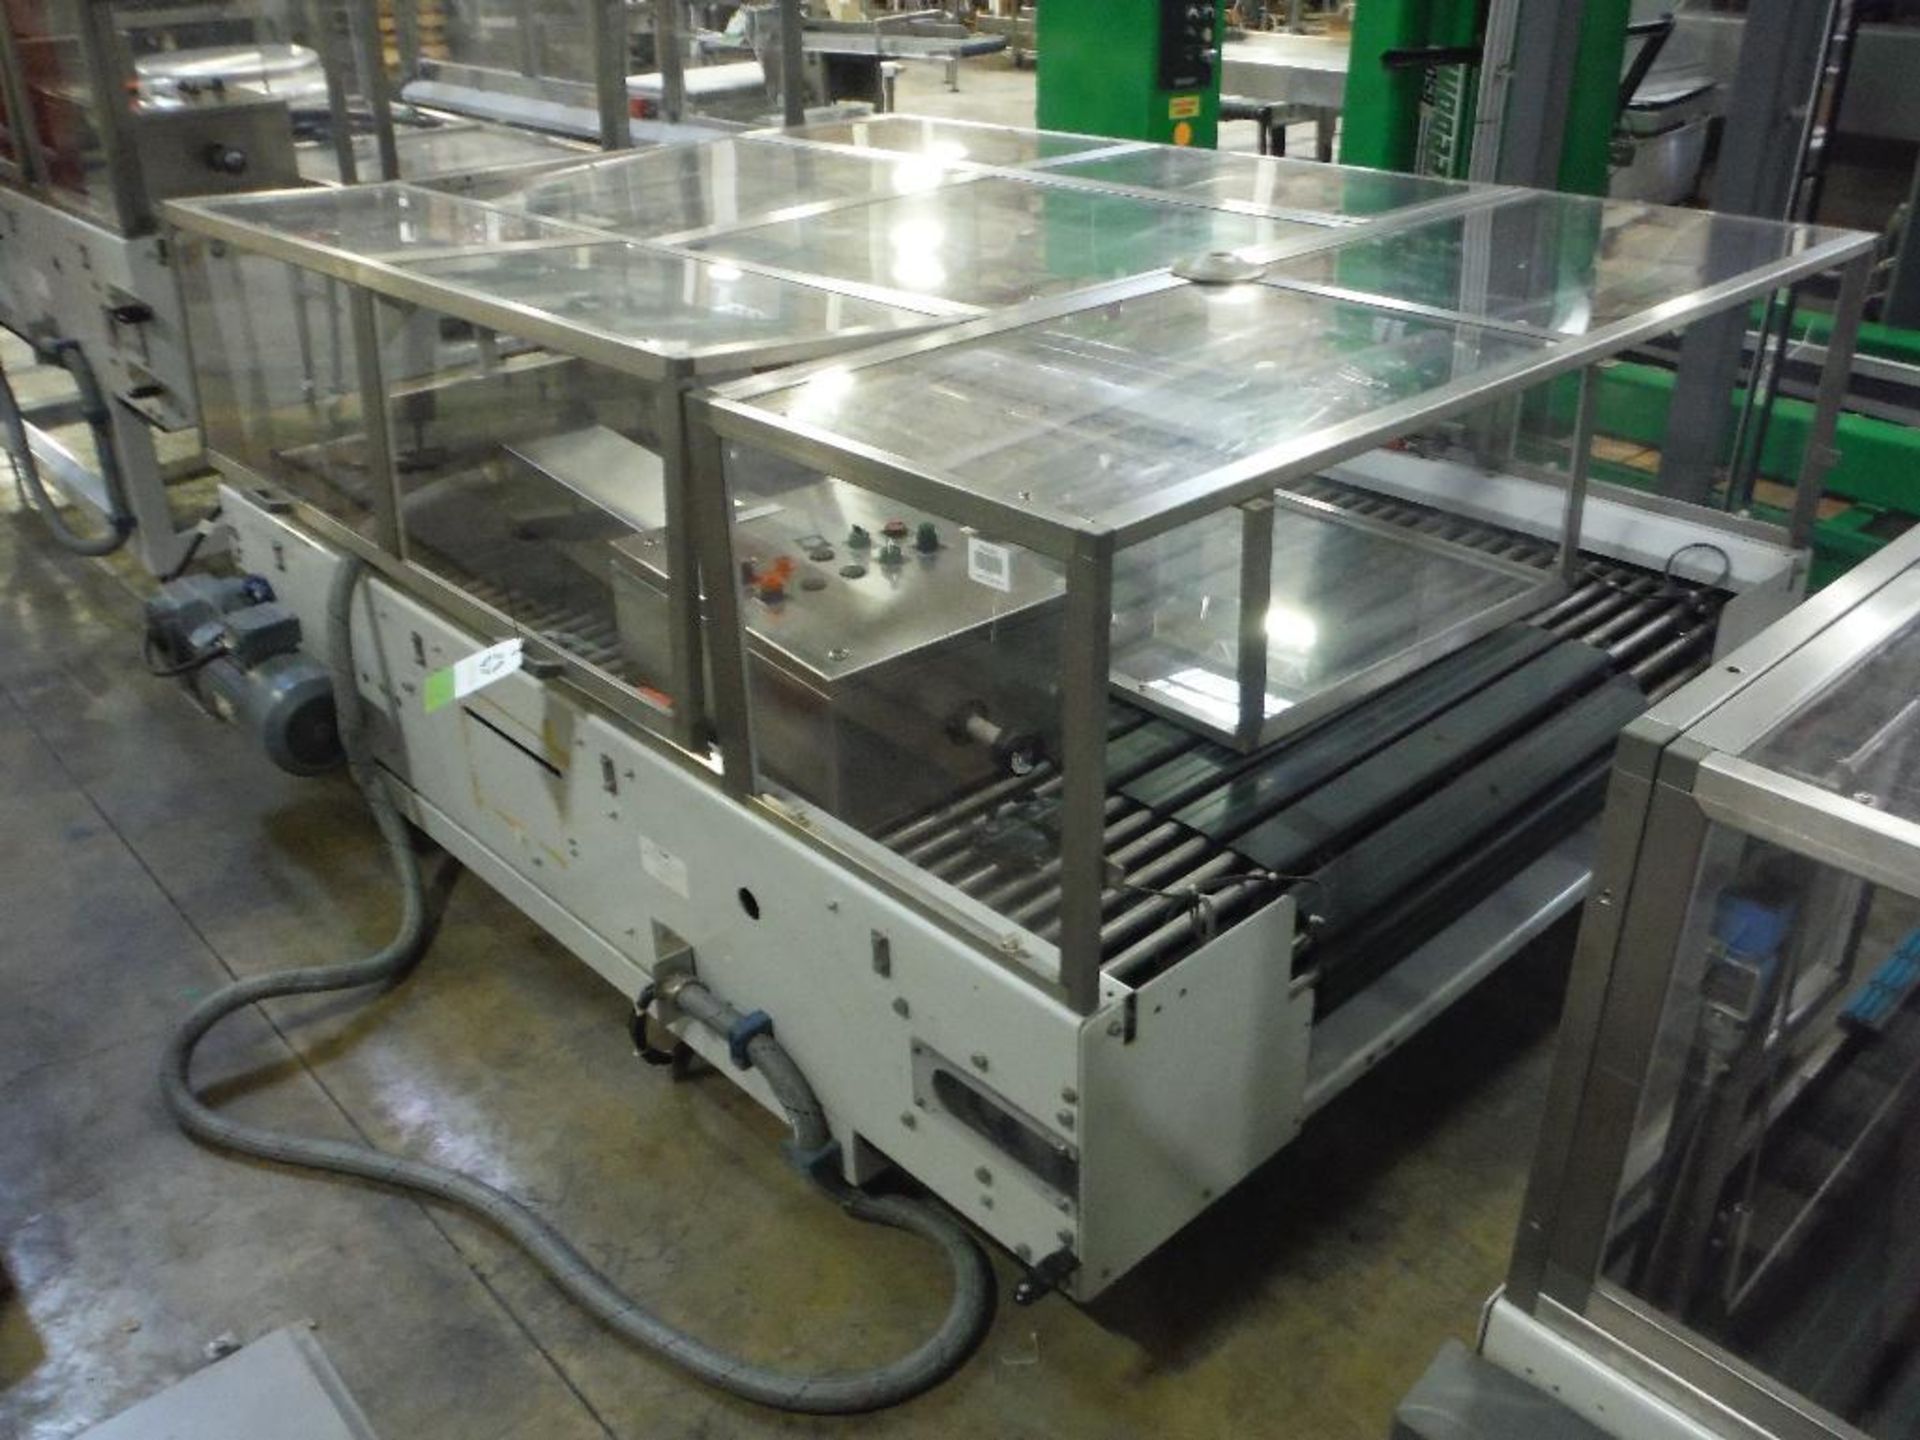 2007 Sidel combiner conveyor, Model TDC0016, SN 904835-SMMM0327, 98 in. long x 66 in. wide, with con